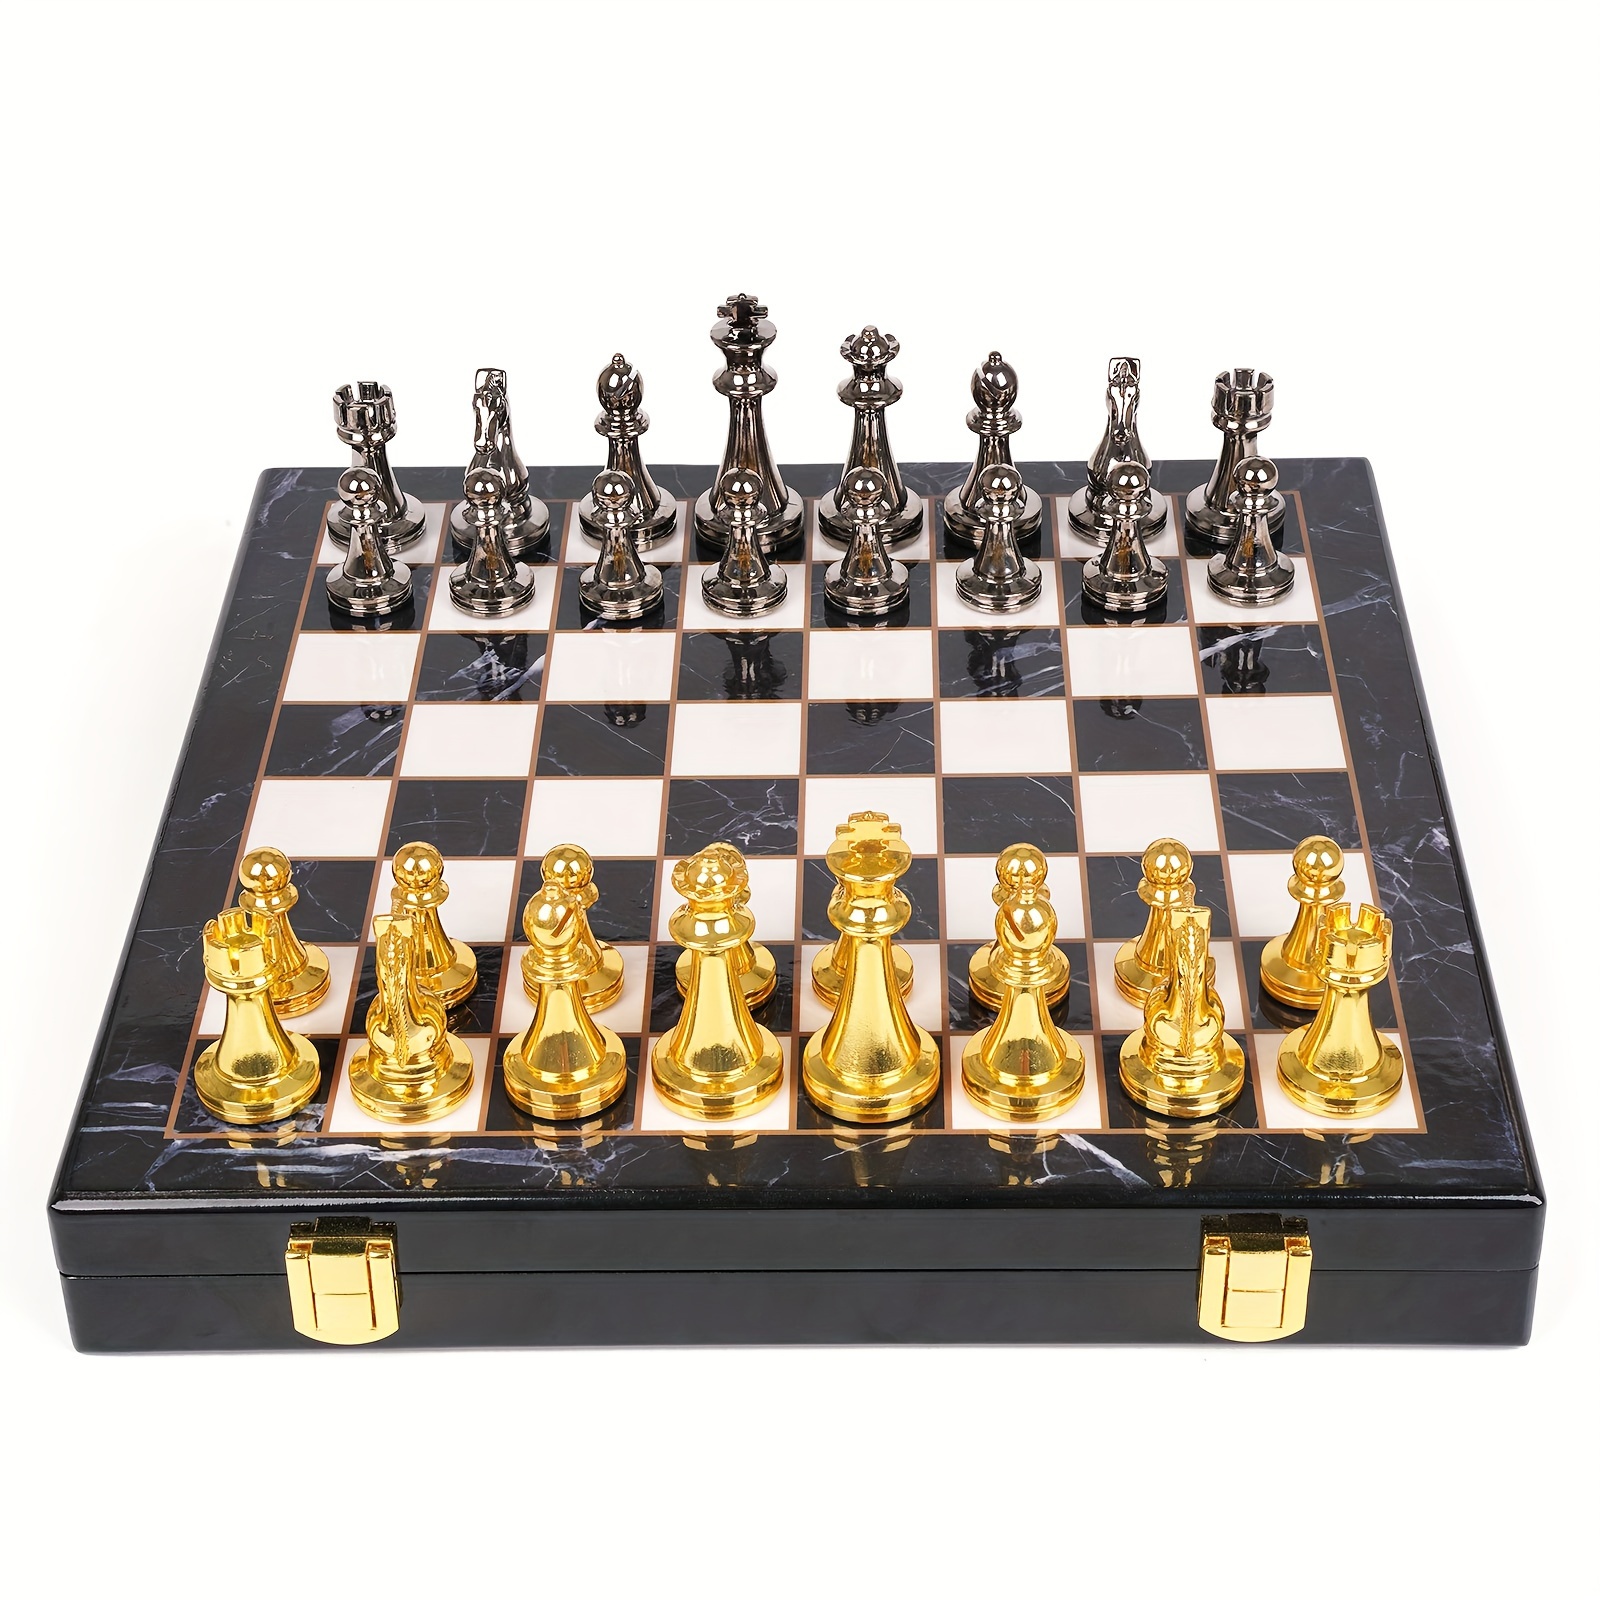 

Retro Metal Chess Set For Adults Marbling Chess Board With Chess Pieces Travel Chess Set With Metal Pieces Folding Chessboard Ideal For Beginners And Professional Players